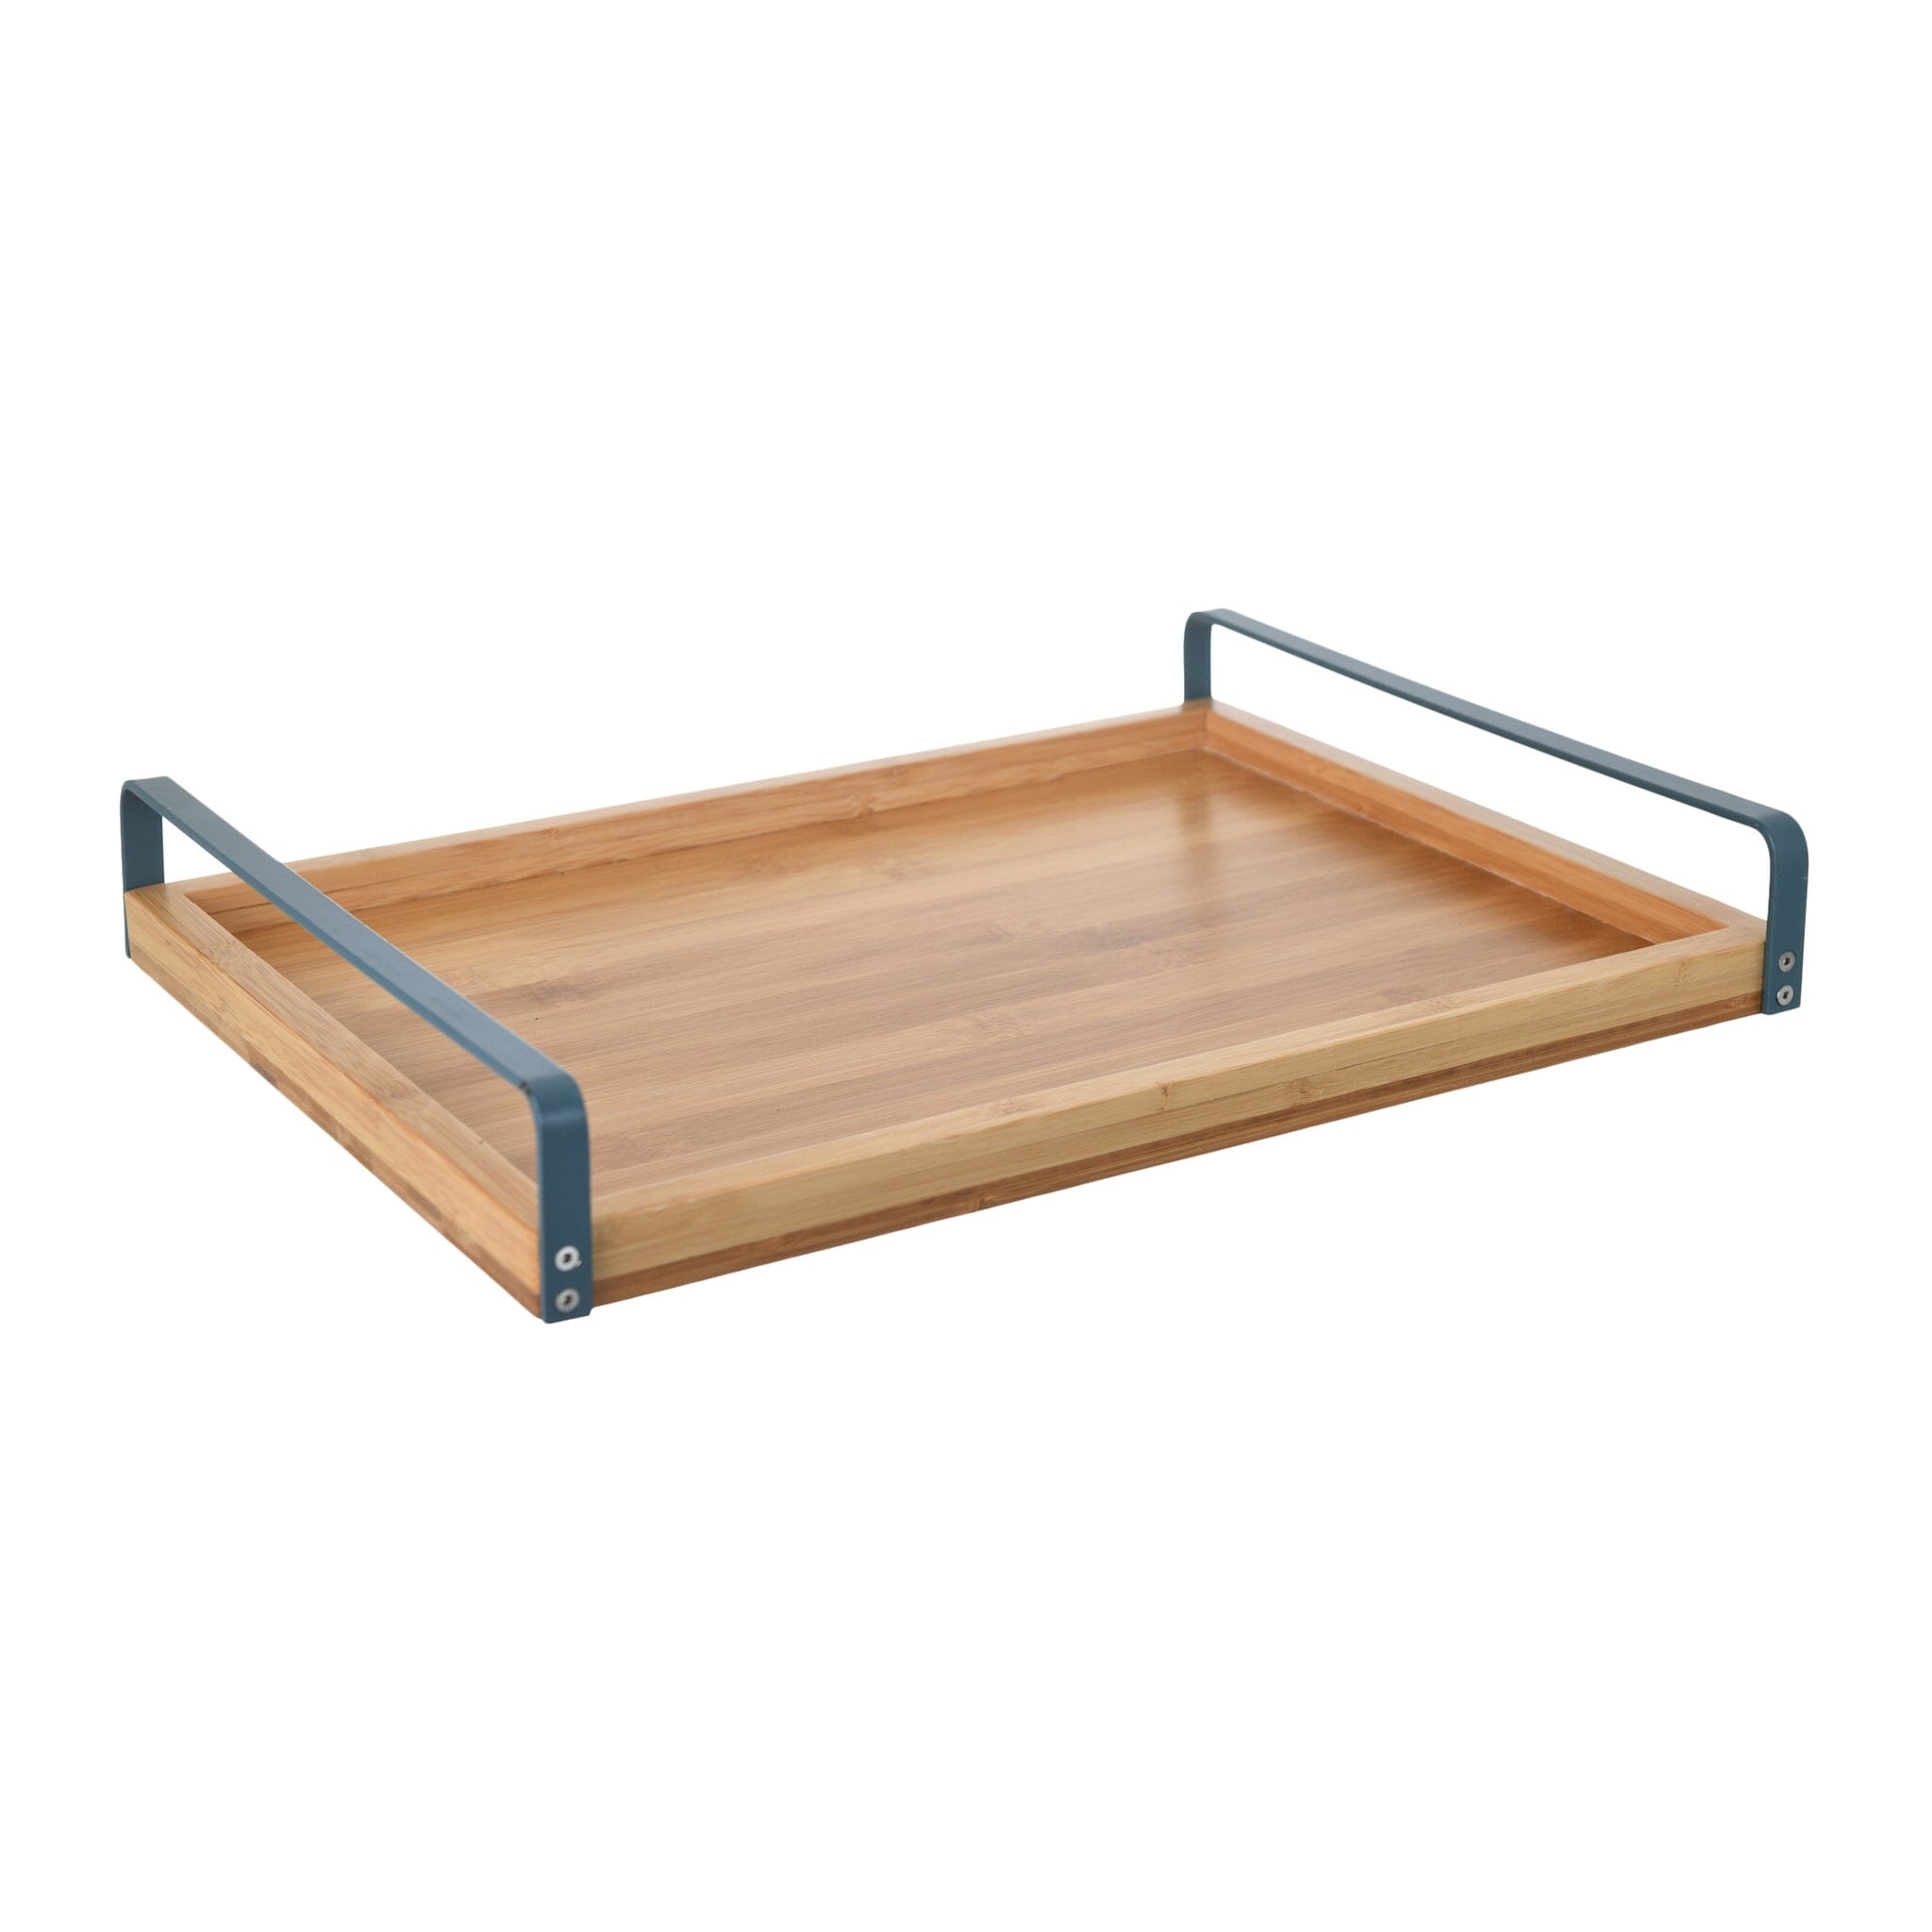 O'lala - Rectangular Wooden Tray With Metal Handle - Petroleum Blue - 28x38cm - 520008172